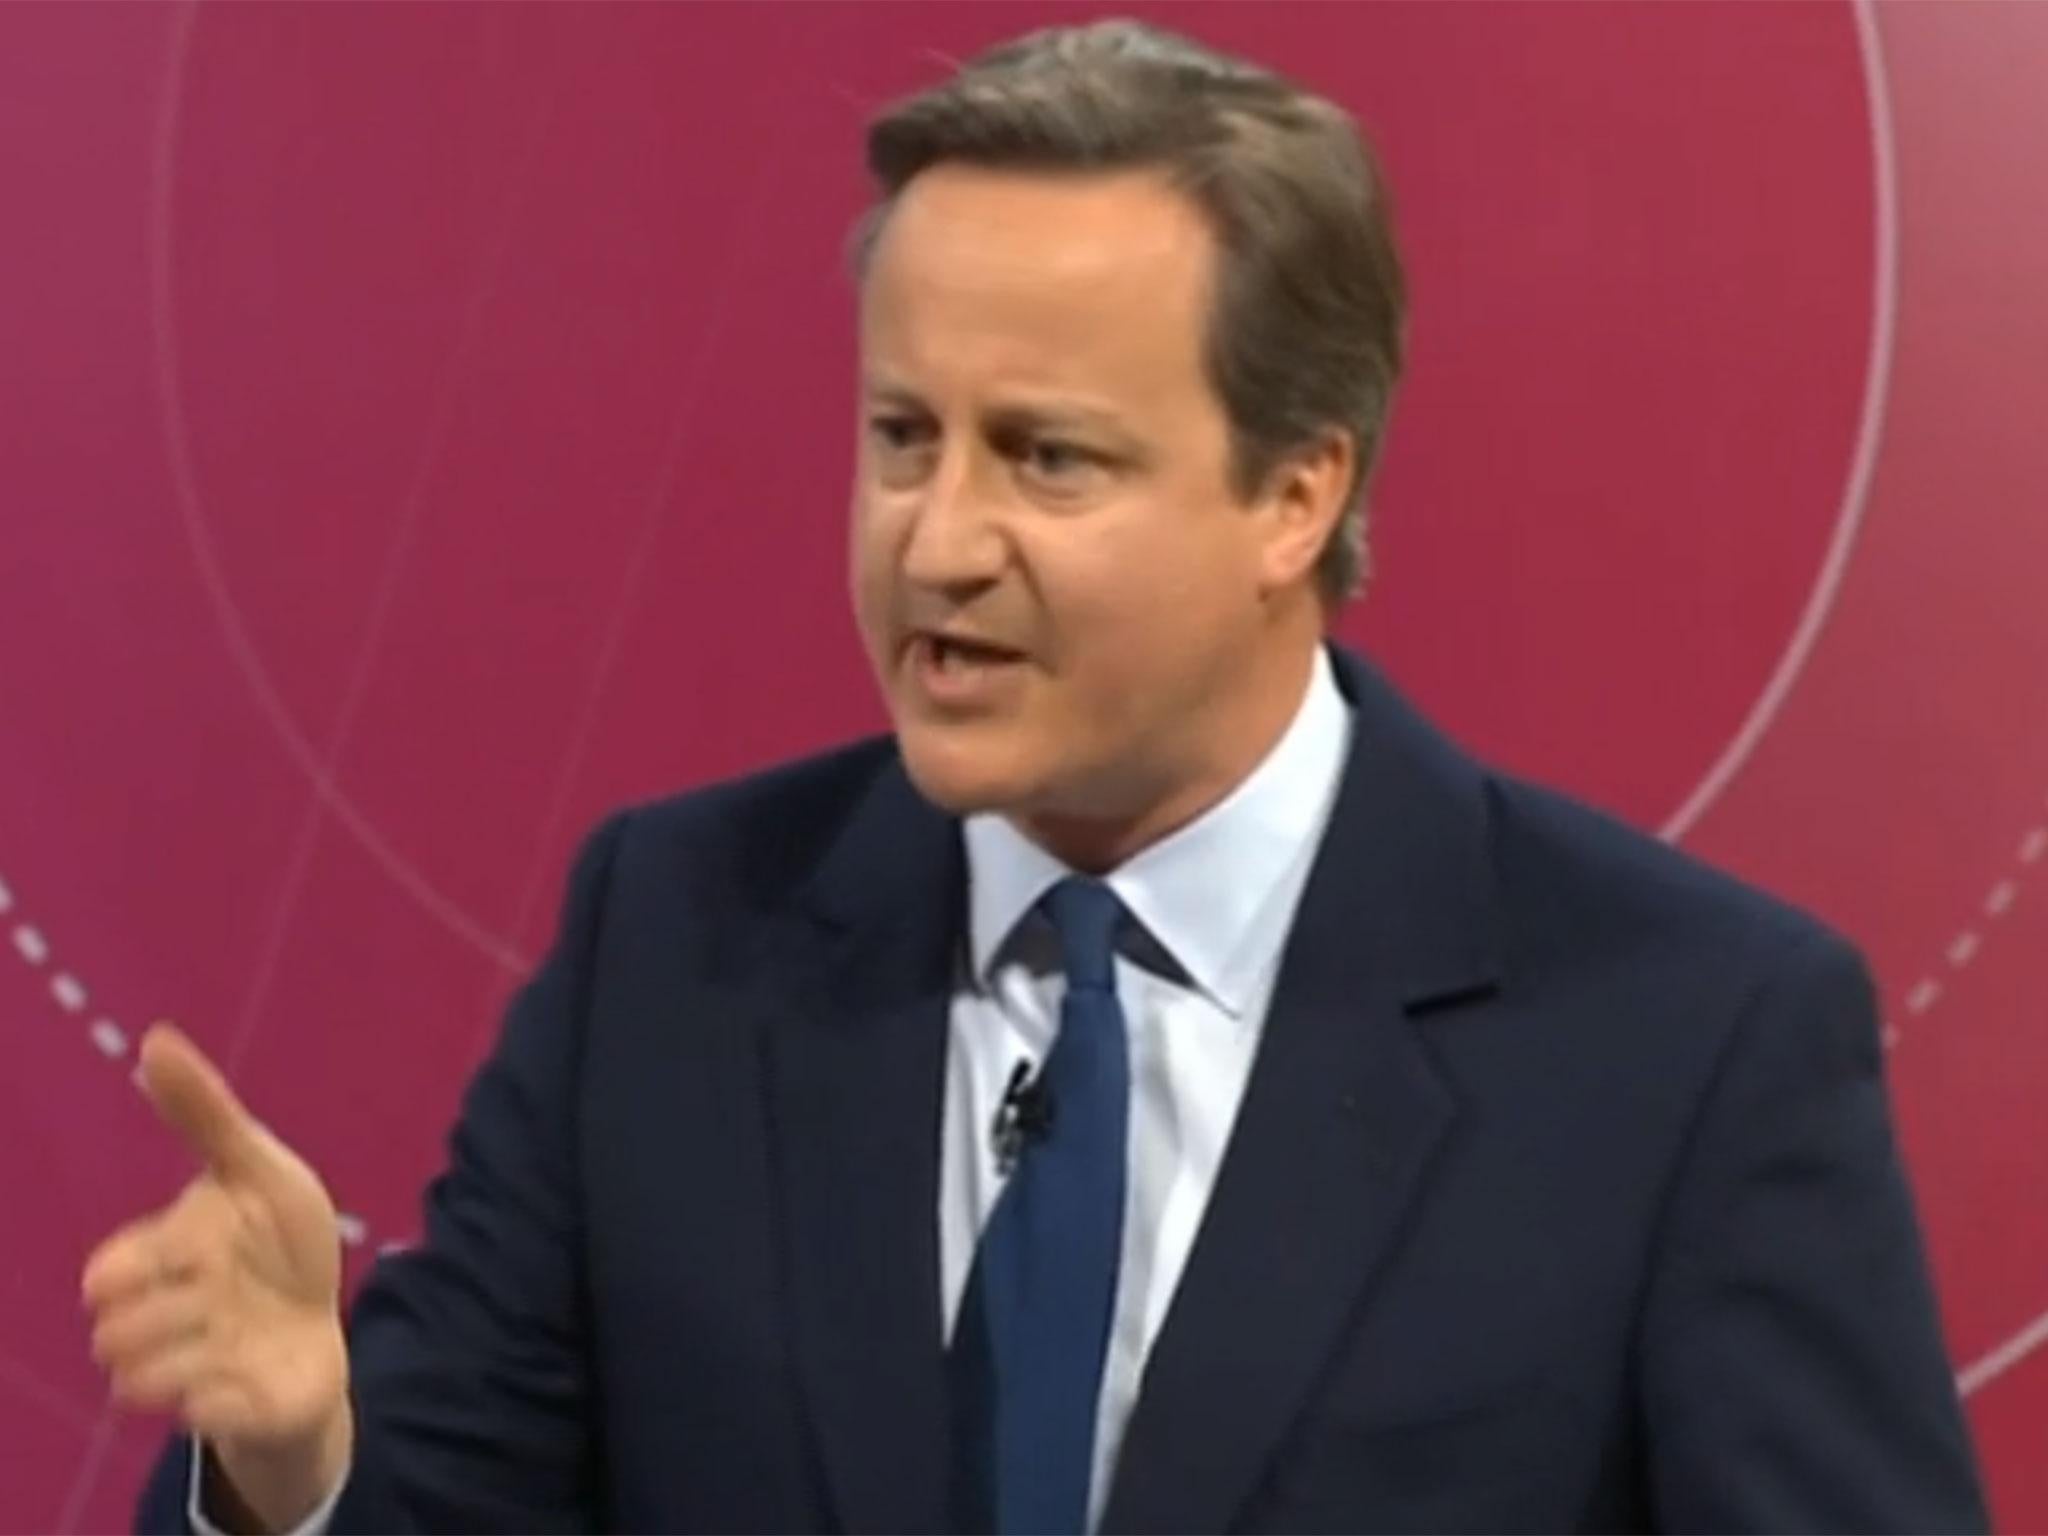 David Cameron speaking on BBC Question Time